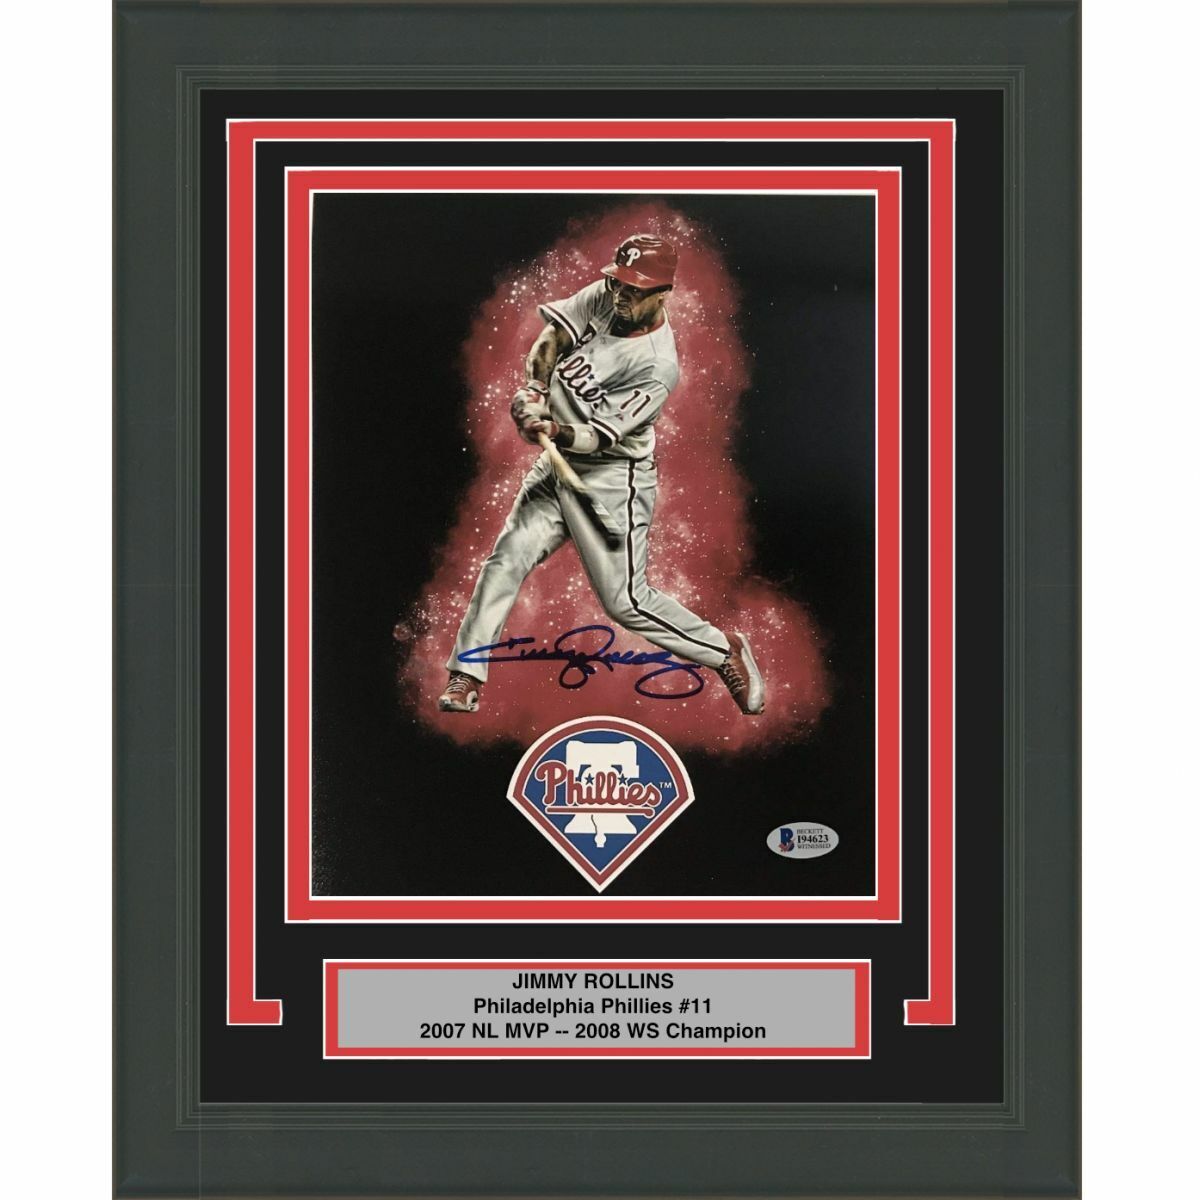 FRAMED Autographed/Signed JIMMY ROLLINS Phillies 8x10 Photo Poster painting Beckett BAS COA #2